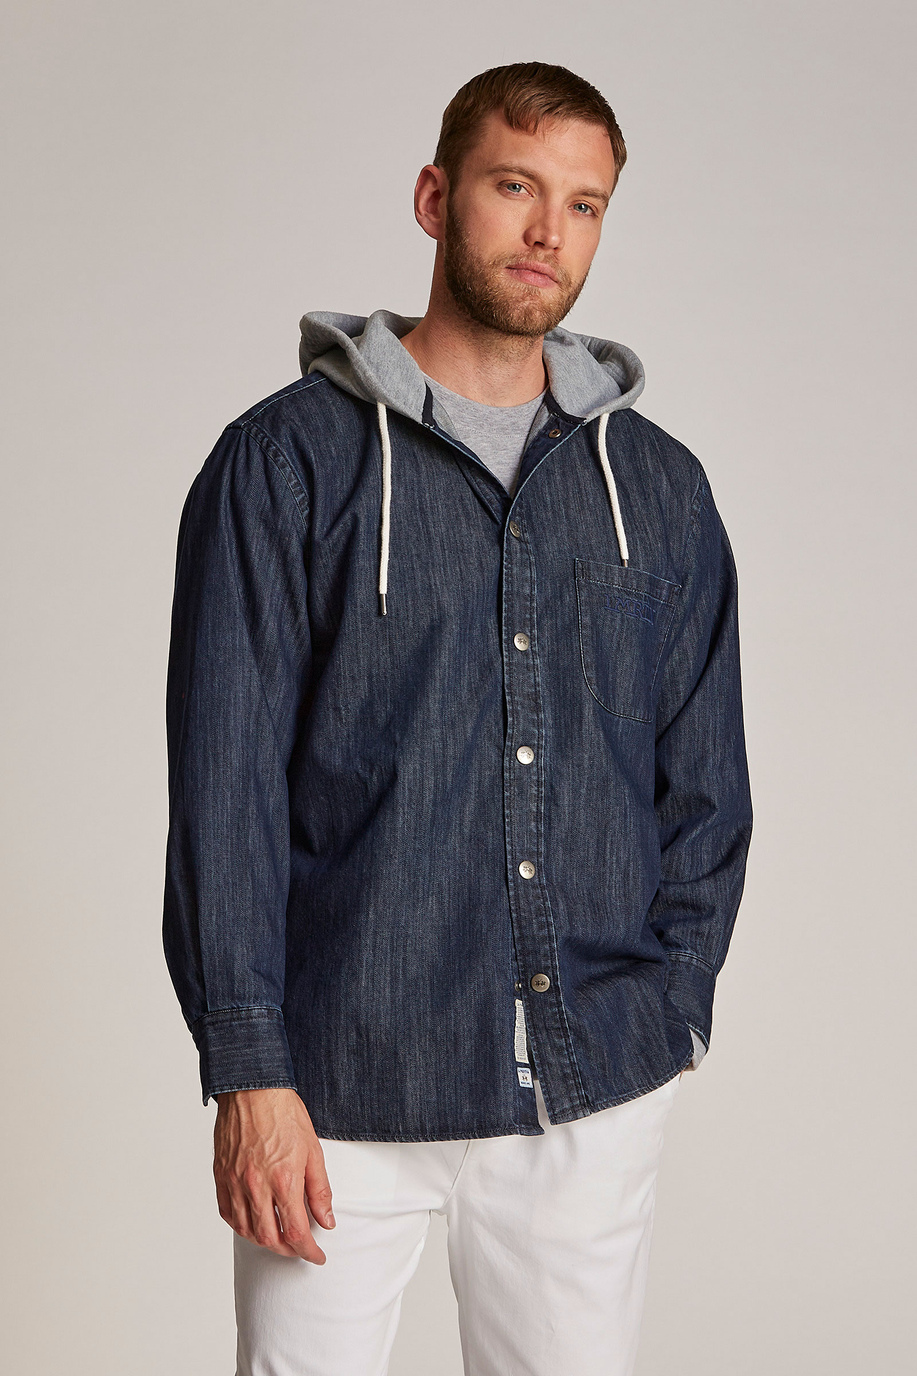 Men's oversized hooded jacket in 100% cotton fabric - Shirts | La Martina - Official Online Shop